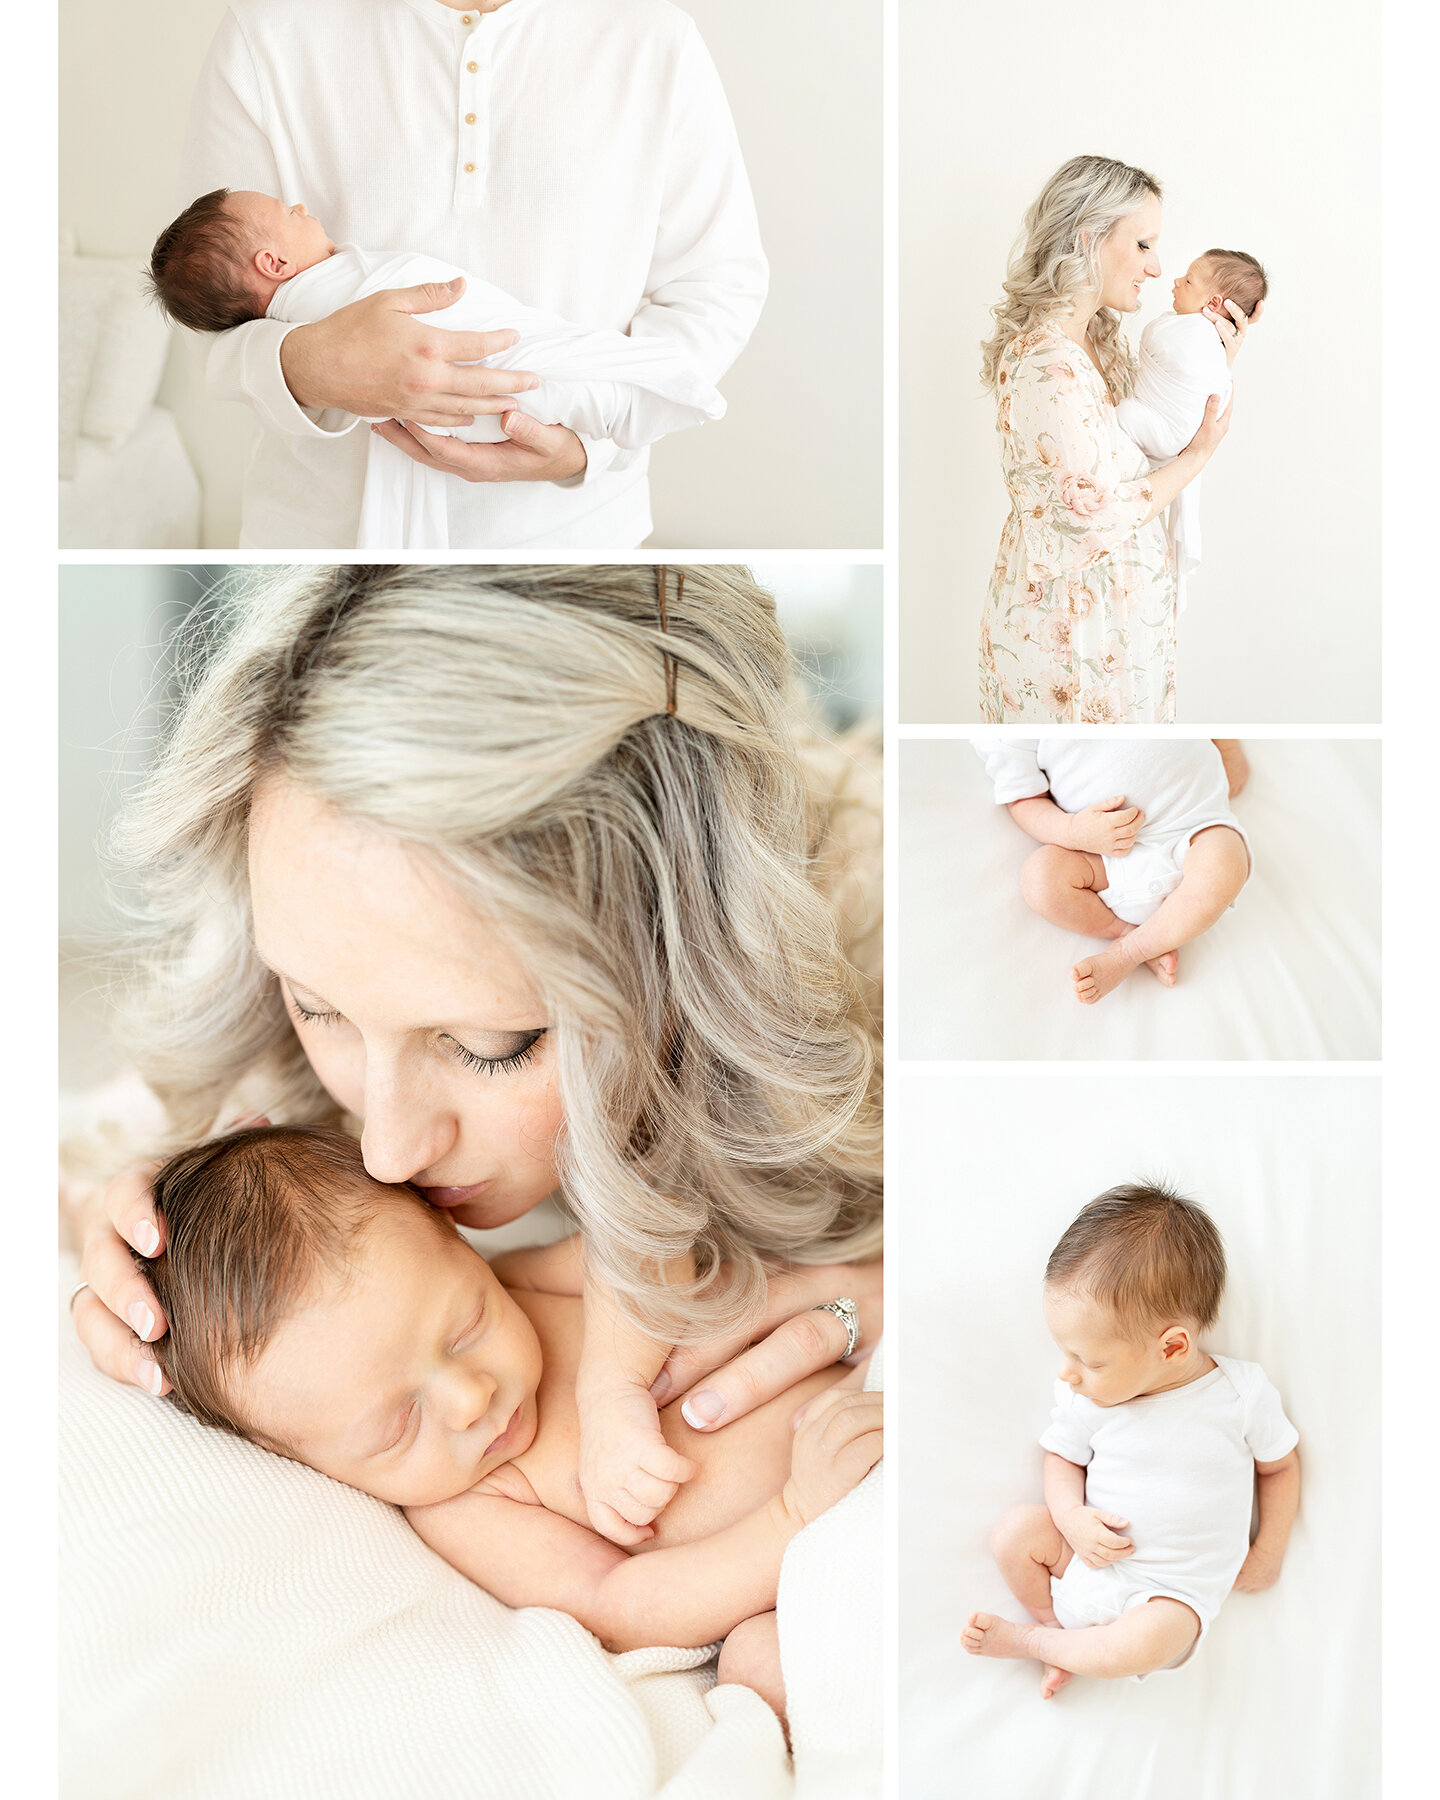 newborn photo collage showing sleeping baby in onsie, mom kissing baby boy, dad holding baby boy during newborn photo shoot in Louisville Ky - Julie Brock Photography.